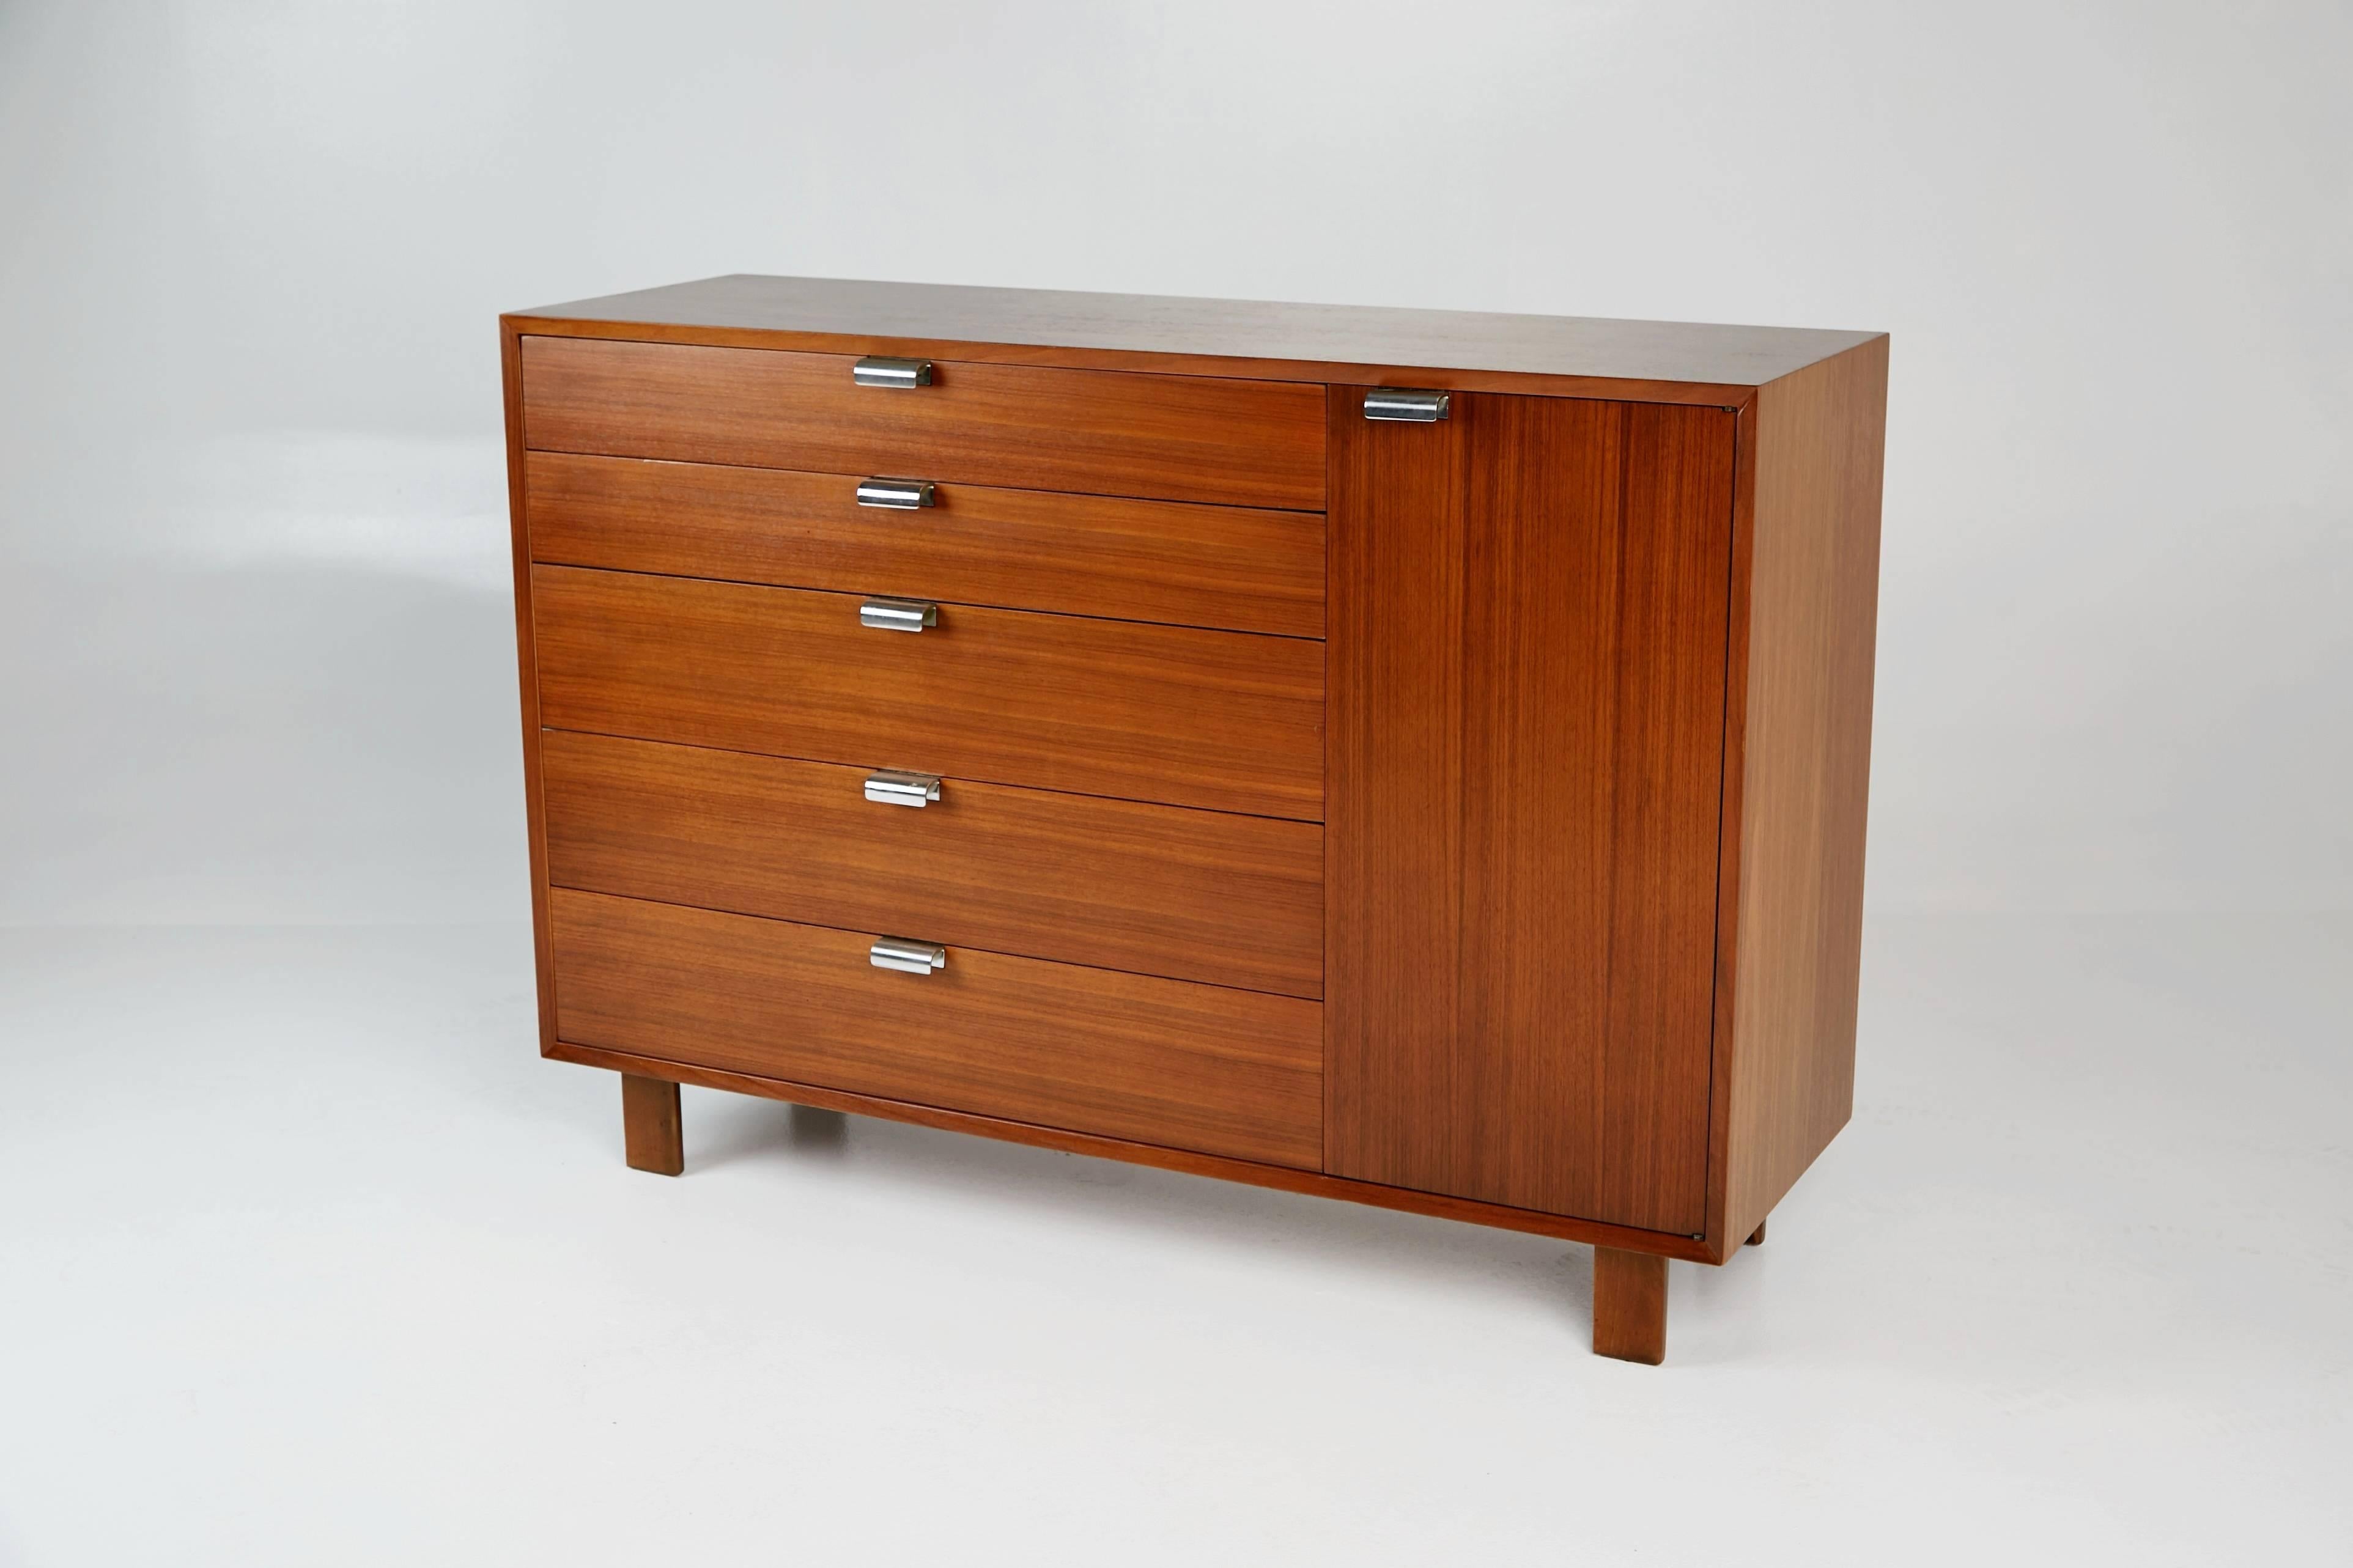 Designed by George Nelson, this dresser or credenza was part of Herman Miller's collection of modular basic storage components. The chest has been newly refinished and features beautiful wood grain which displays fluid movement and variation in